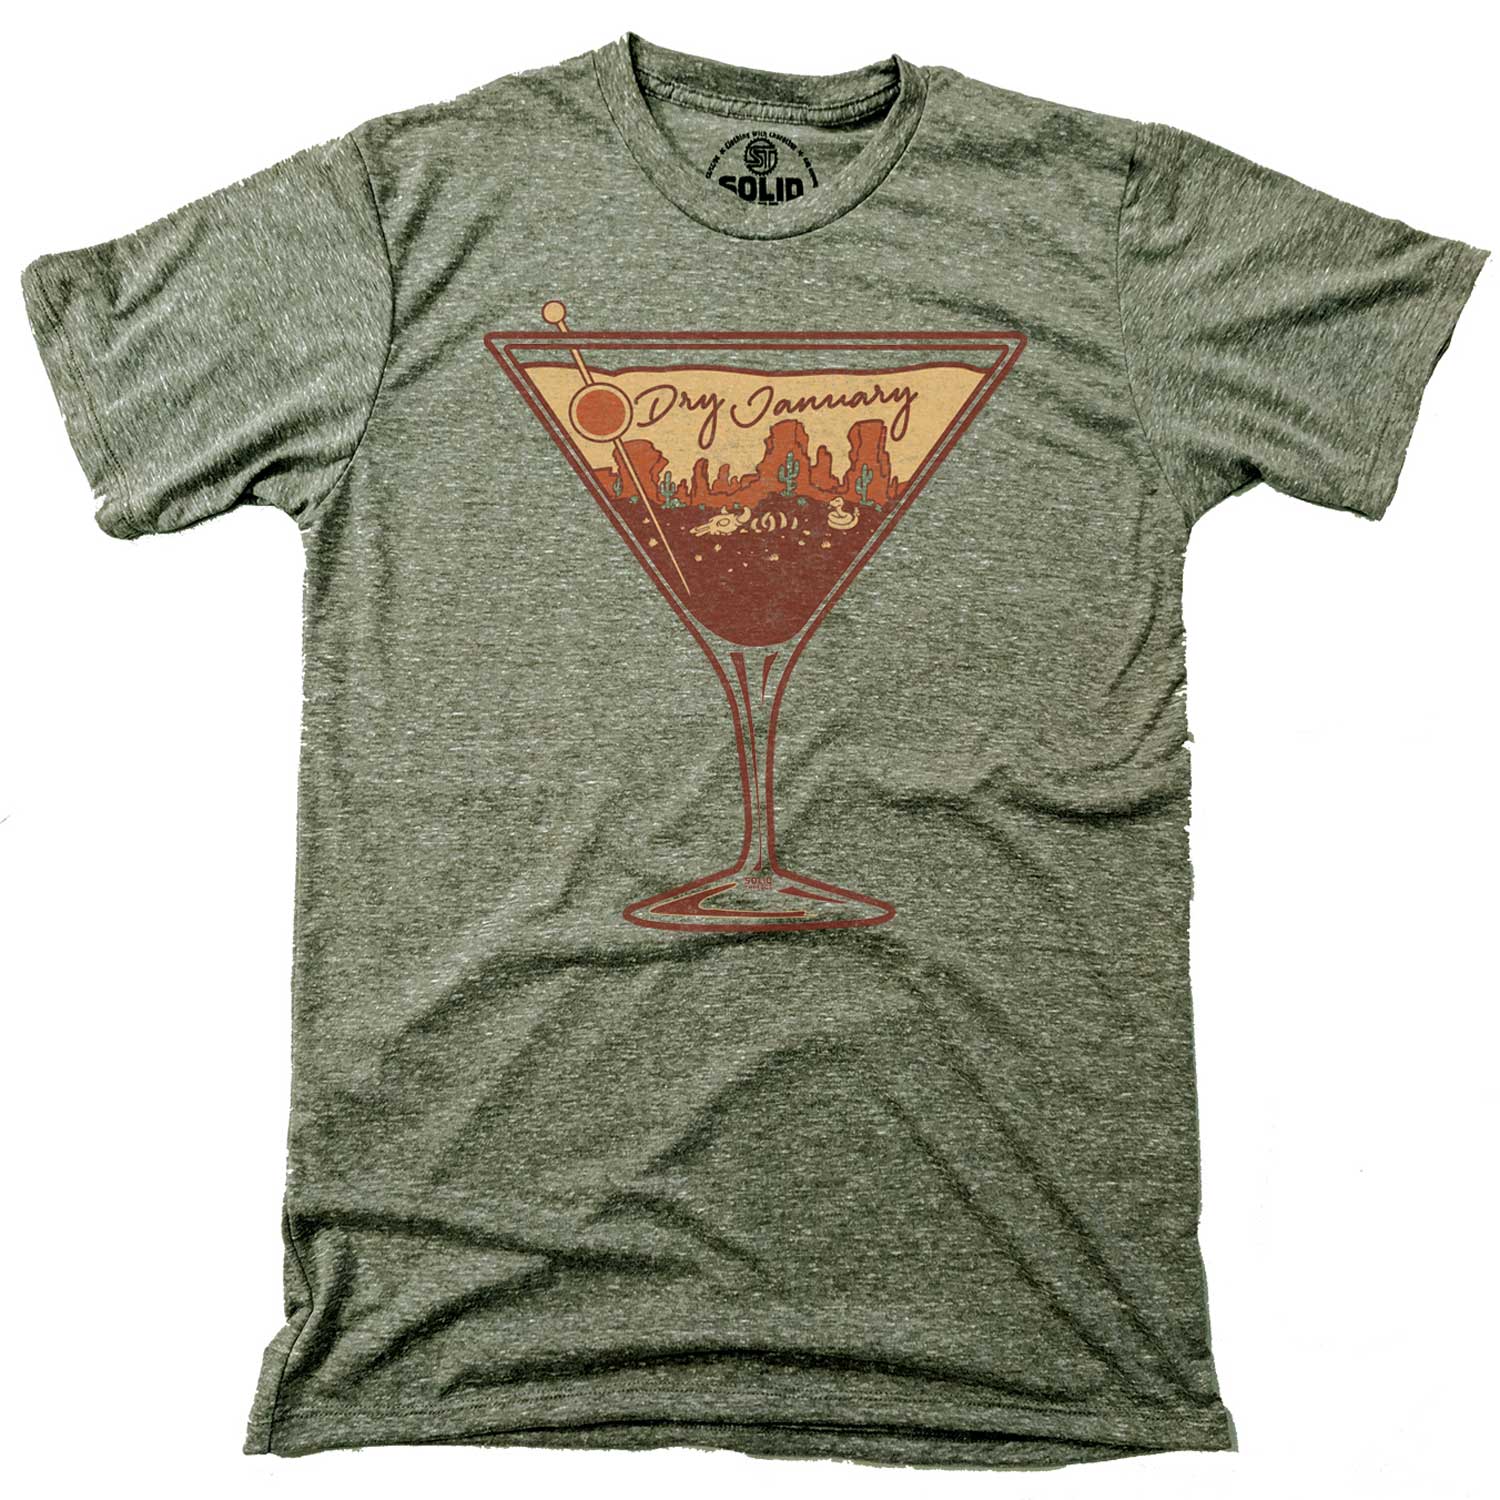 Men's Dry January Vintage Recovery Graphic T-Shirt | Funny Proud Sober Life Tee | Solid Threads